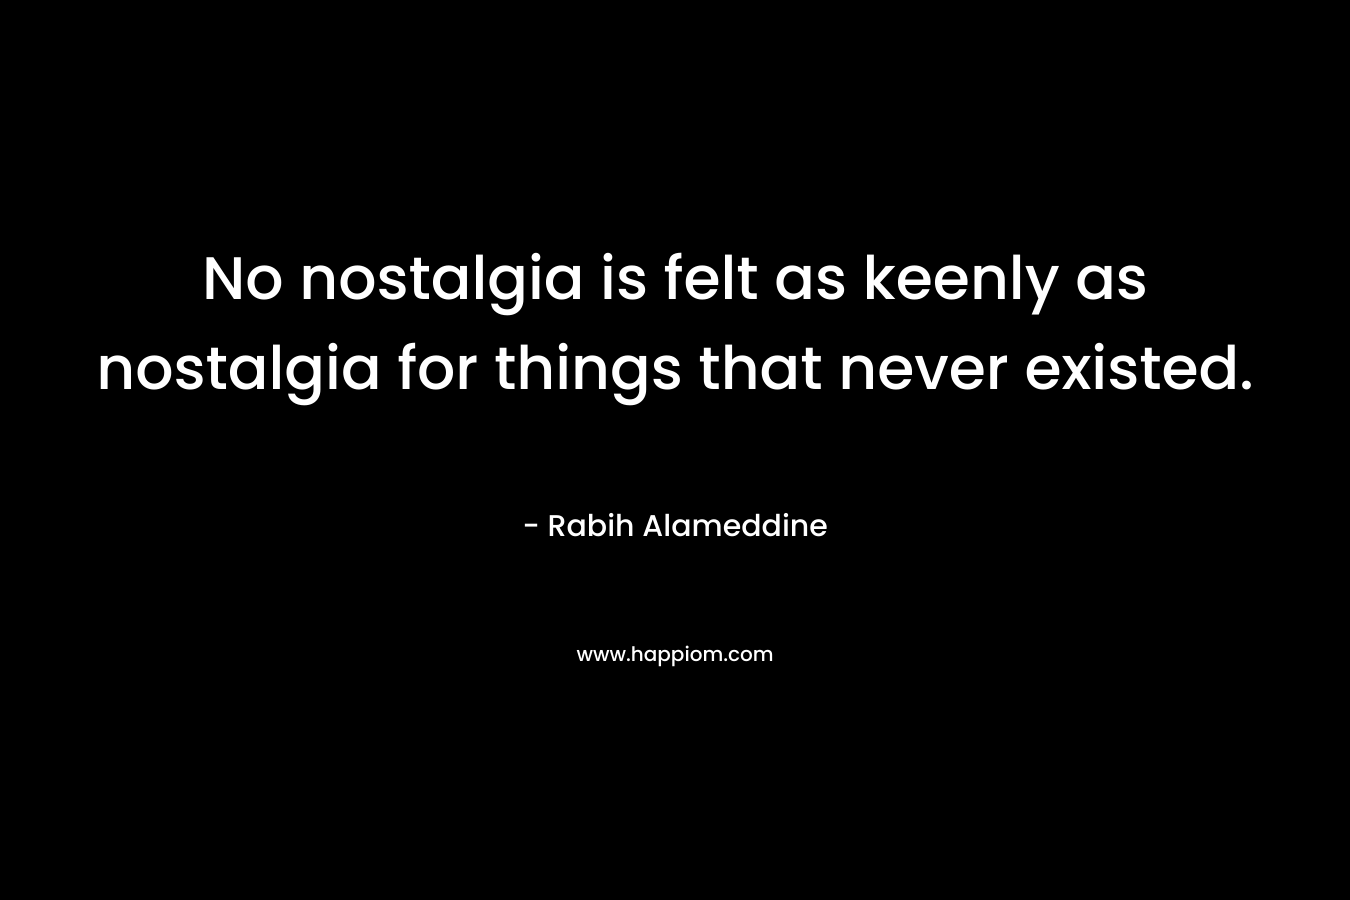 No nostalgia is felt as keenly as nostalgia for things that never existed. – Rabih Alameddine